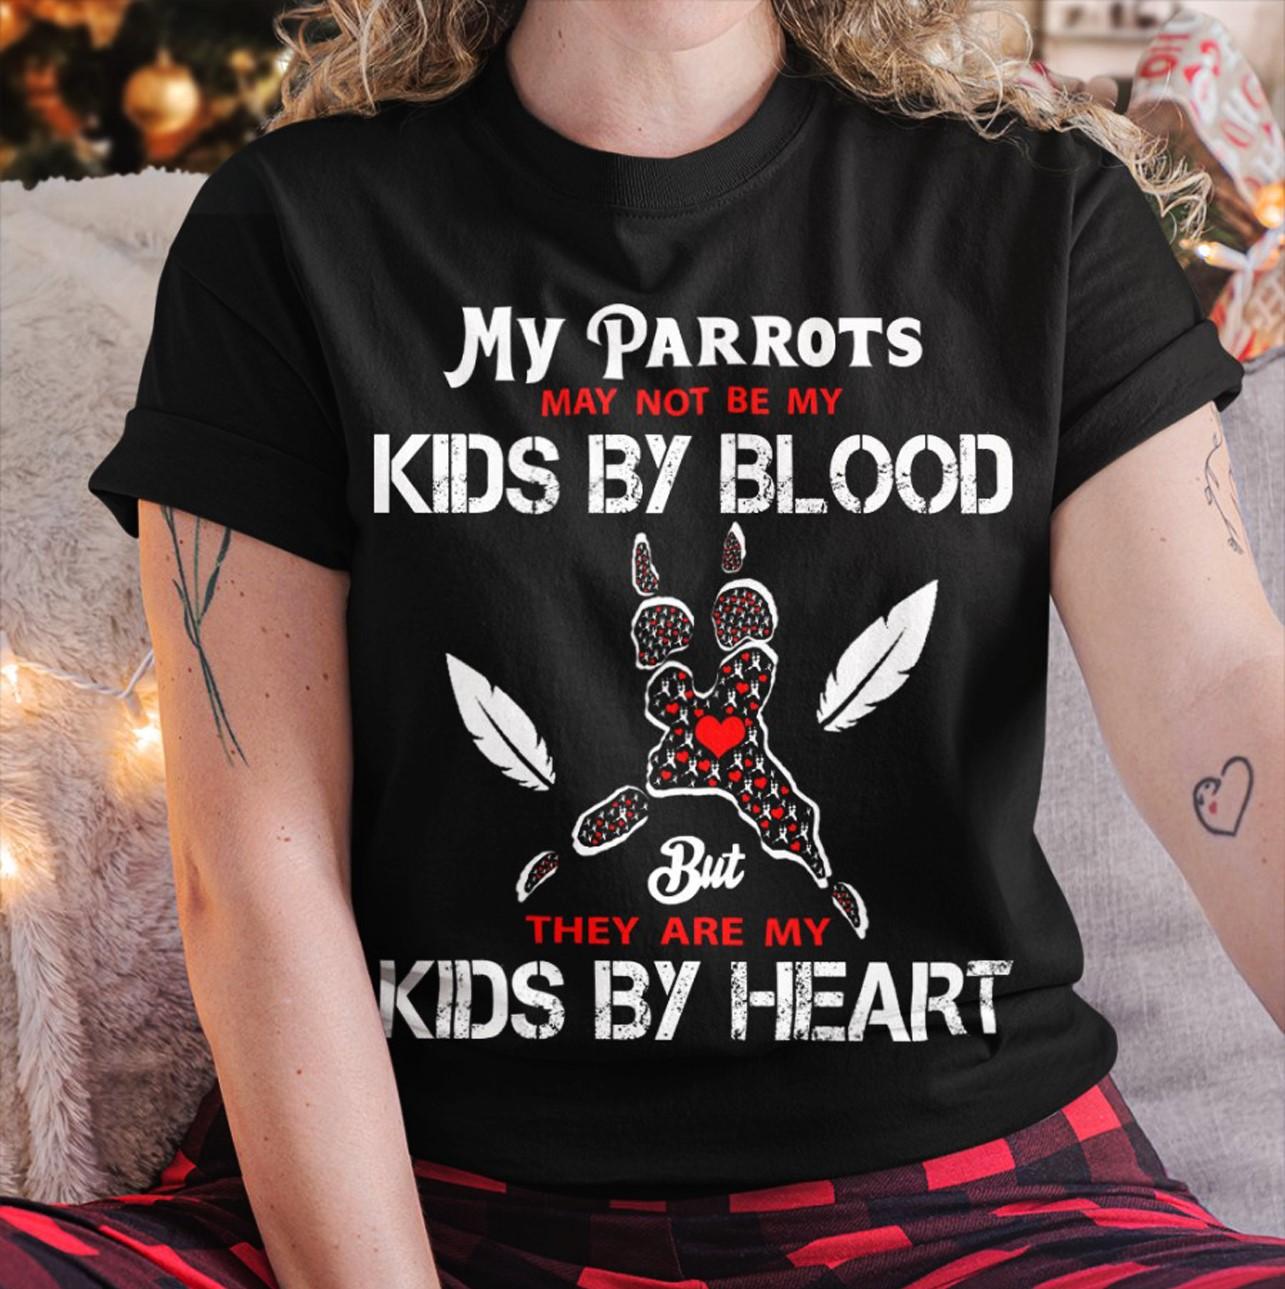 My parrots may not be my kids by blood but they are my kids by heart - Parrot lovers, parrot footprint graphic